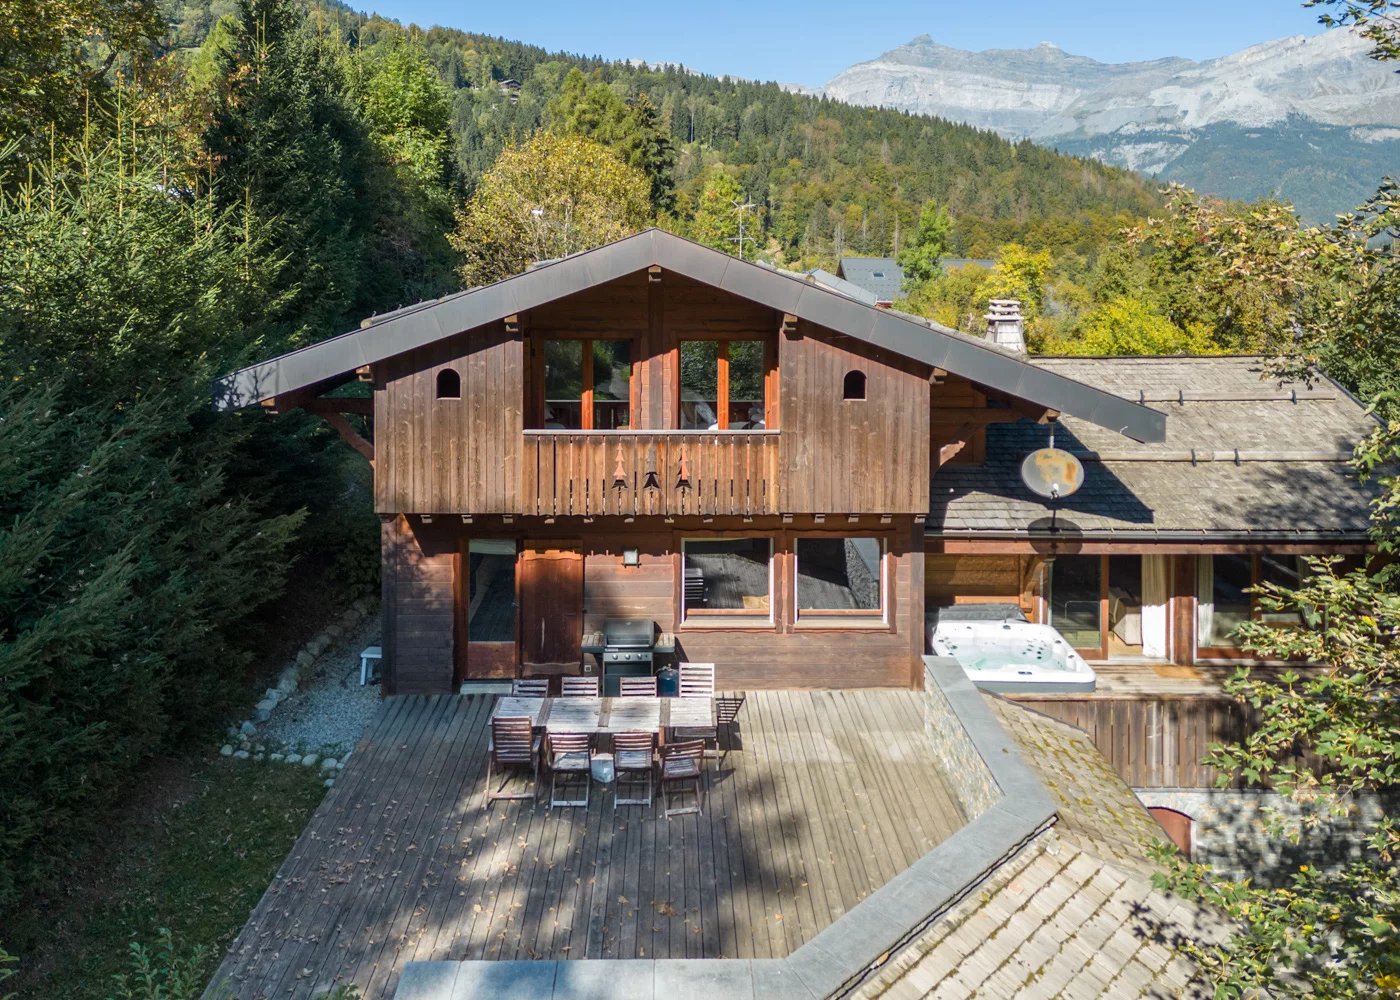 Les Houches - A superb 5-bedroom chalet in a quiet location close to the ski lifts, with breathtaking views of the Mont Blanc range.